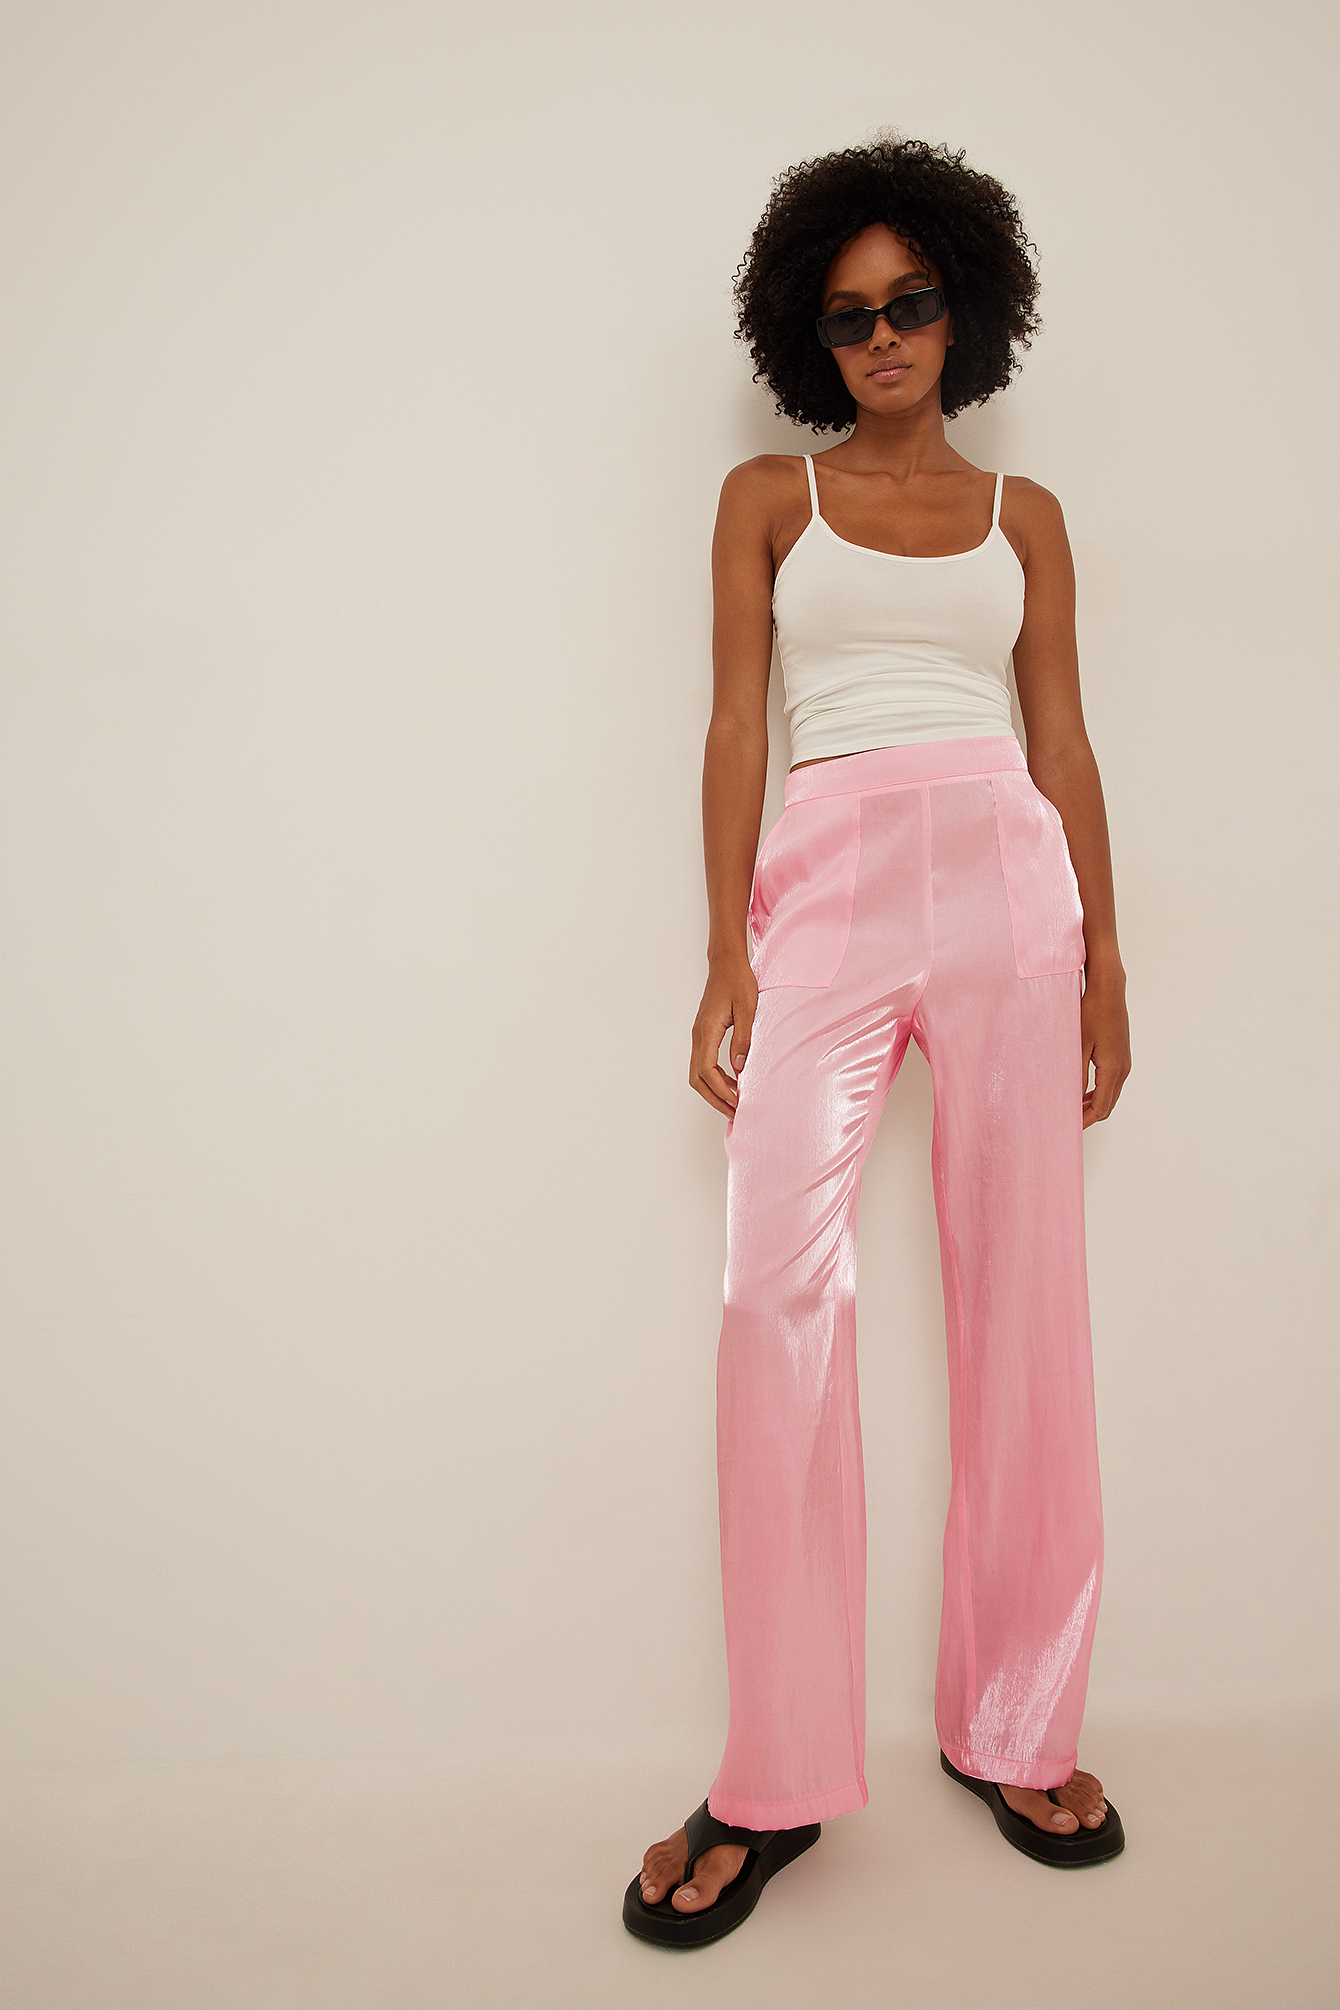 Chanel Fall 2009 Pink Wool High Waist Wide Leg Trouser Pants - 2 – I MISS  YOU VINTAGE